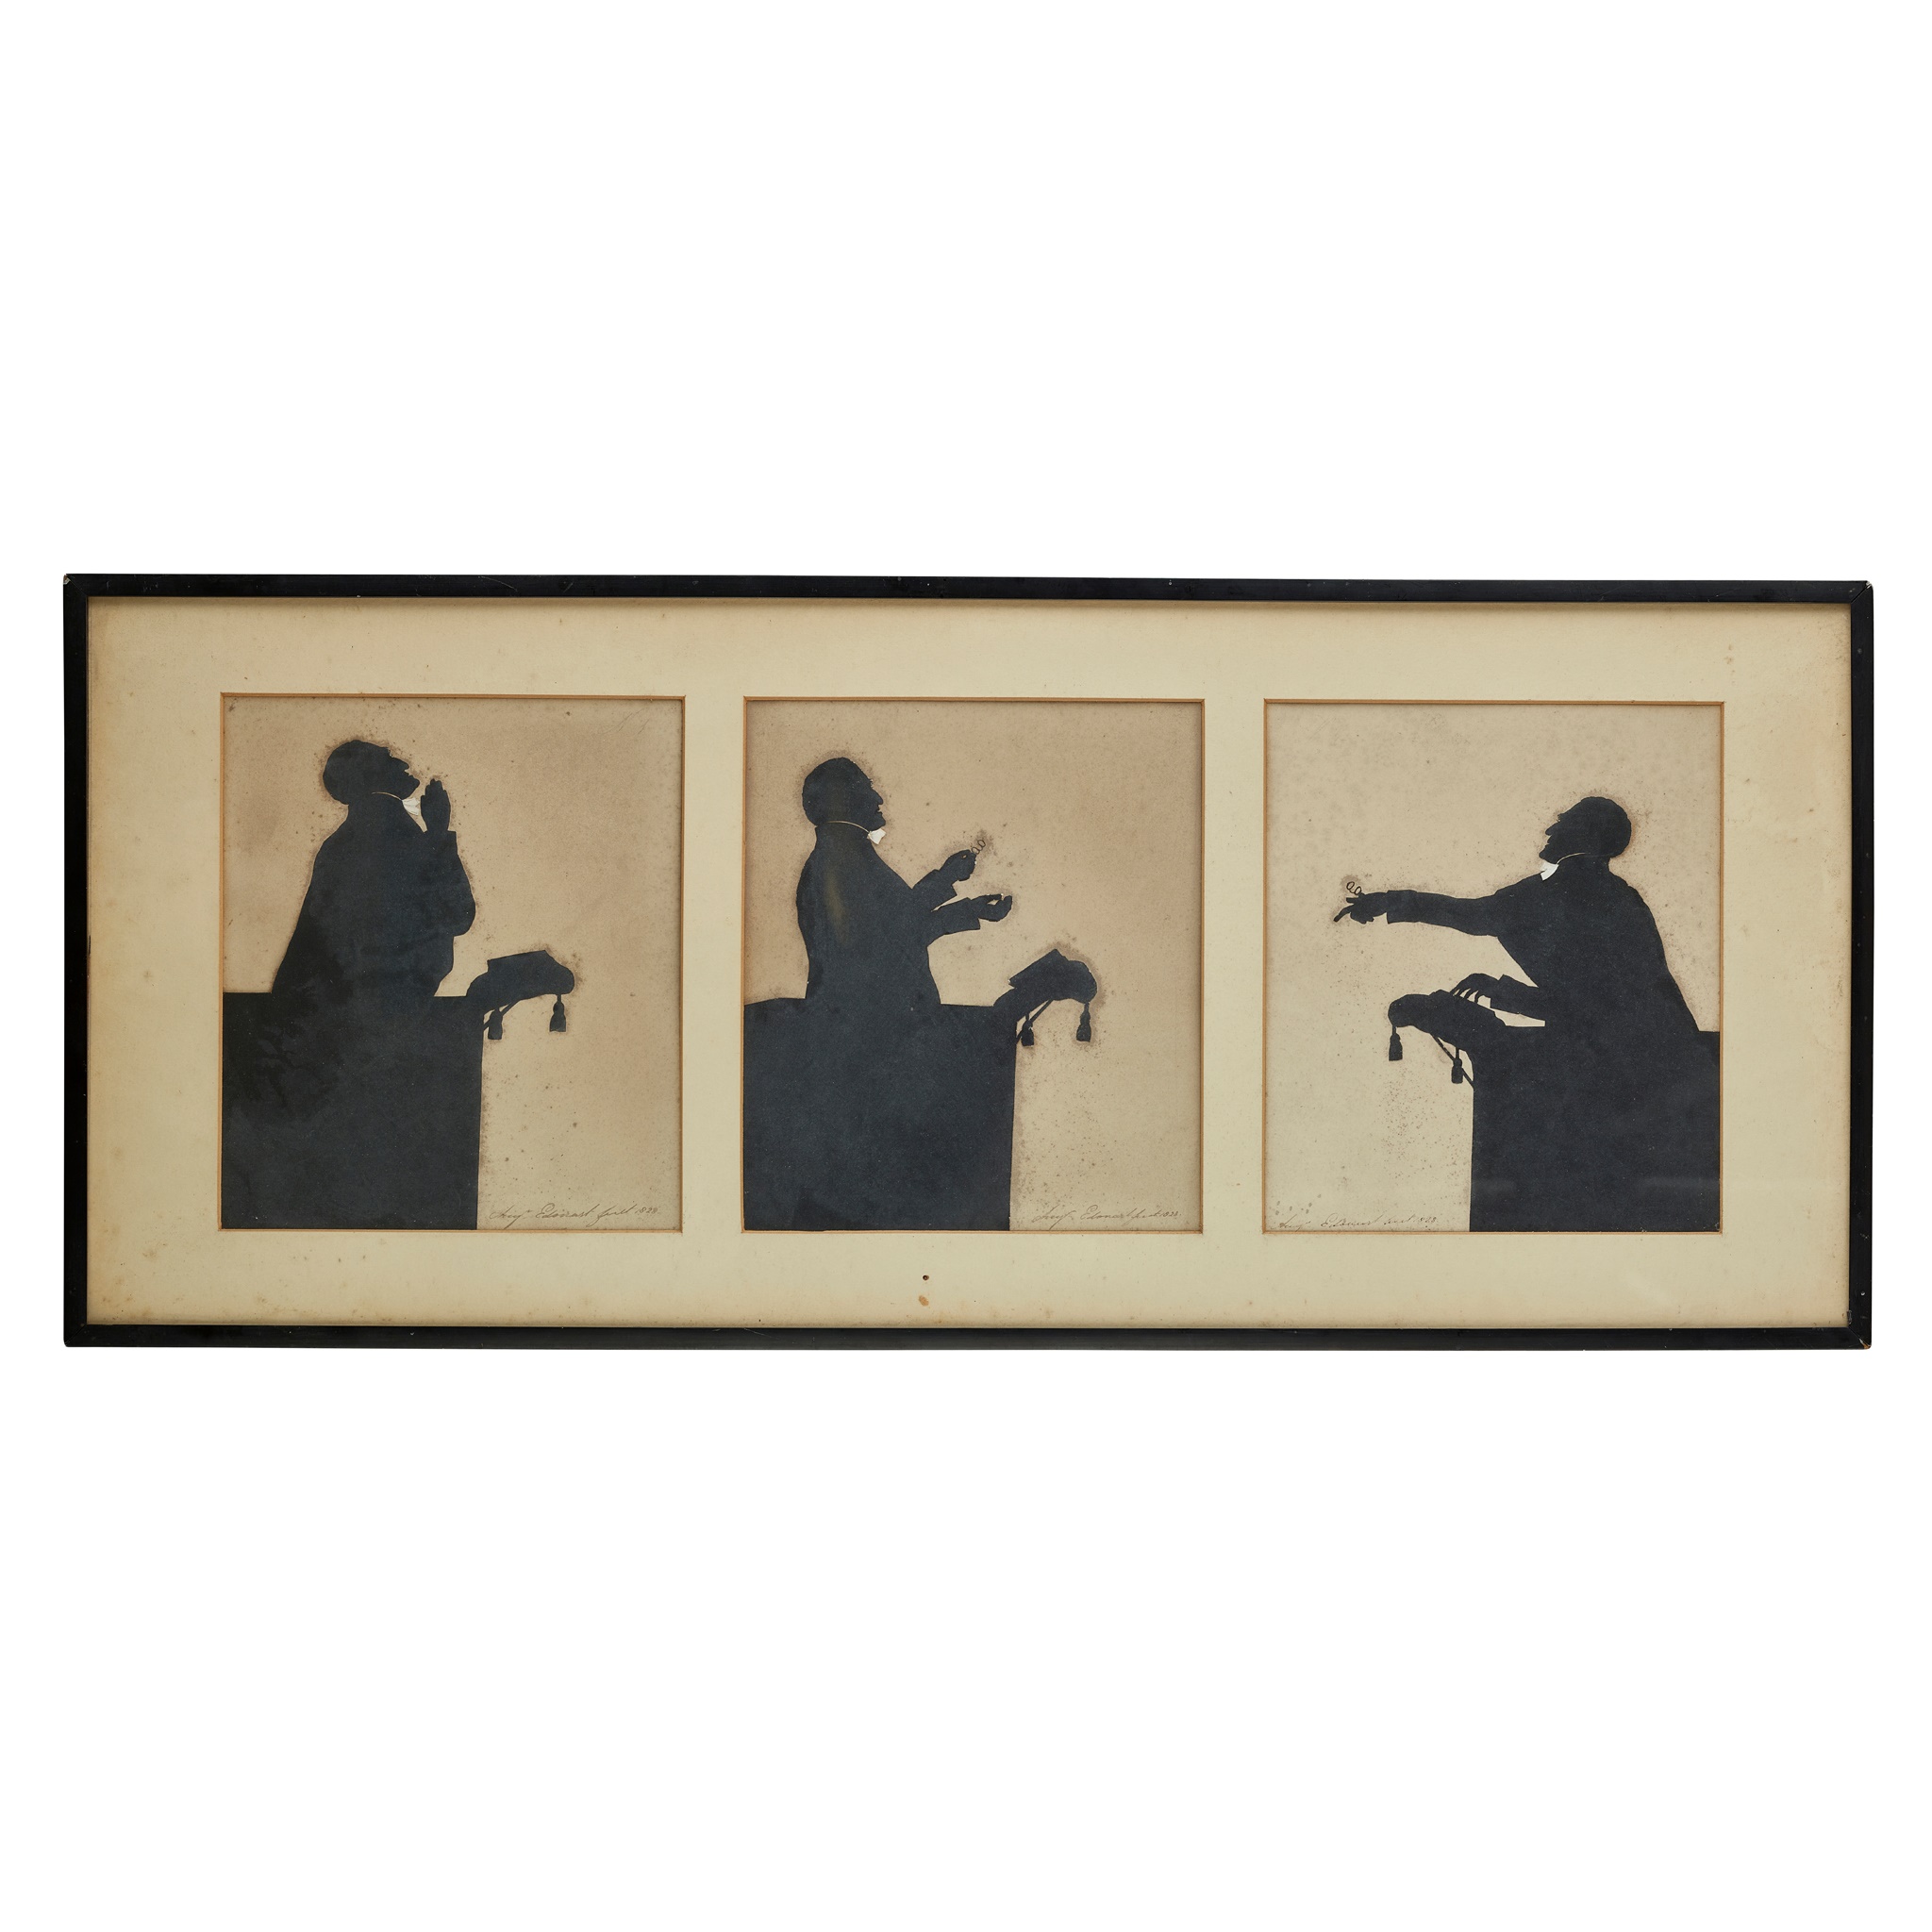 AUGUSTE EDOUART (1789-1861) THREE SILHOUETTES OF A MINISTER DELIVERING A SERMON